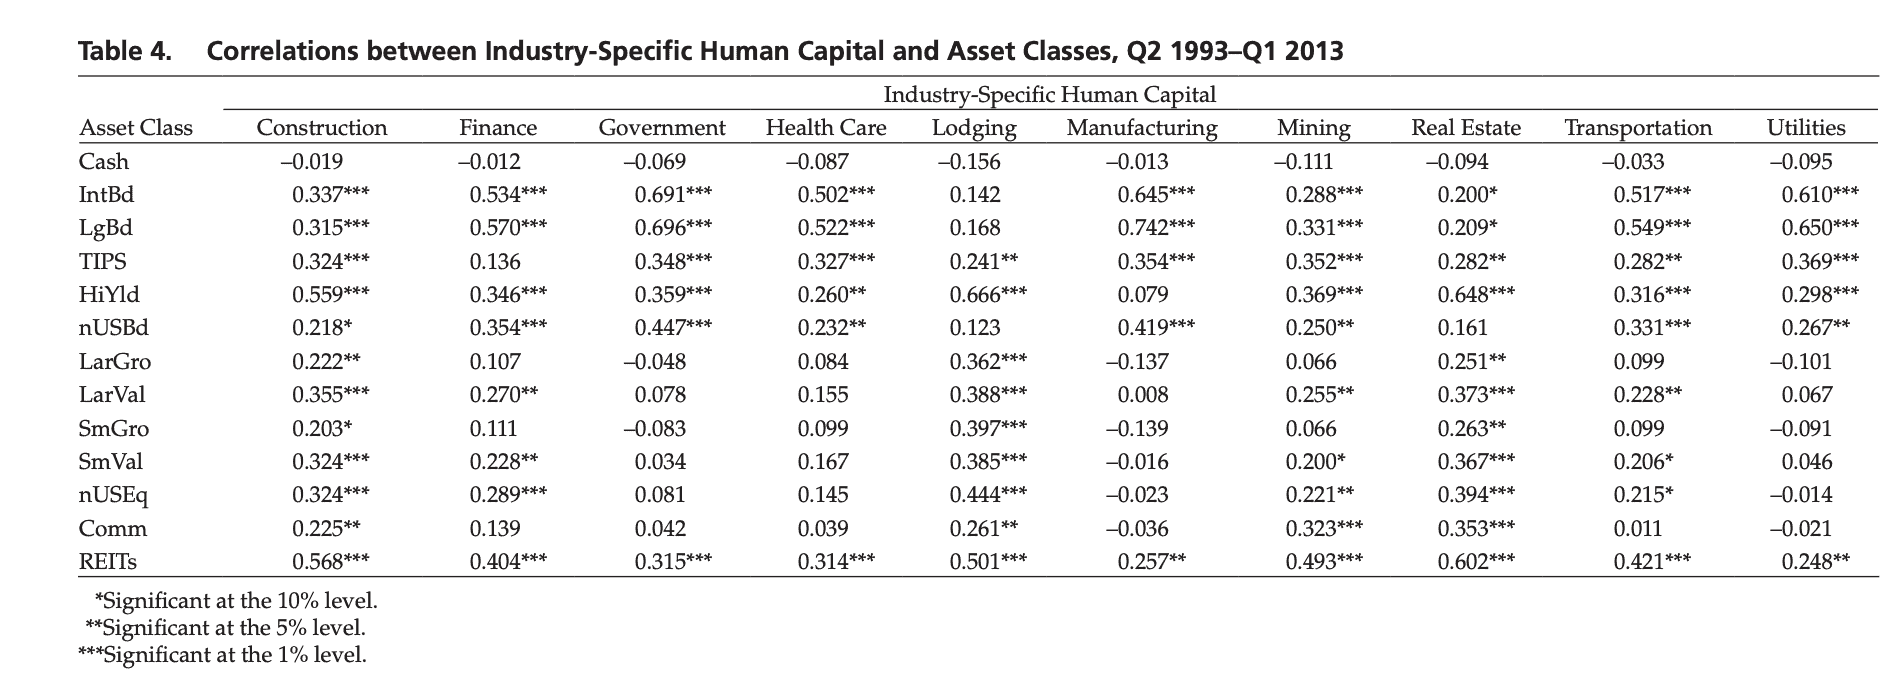 Table 4 correlations between industry-specific human capital and a variety of asset classes.